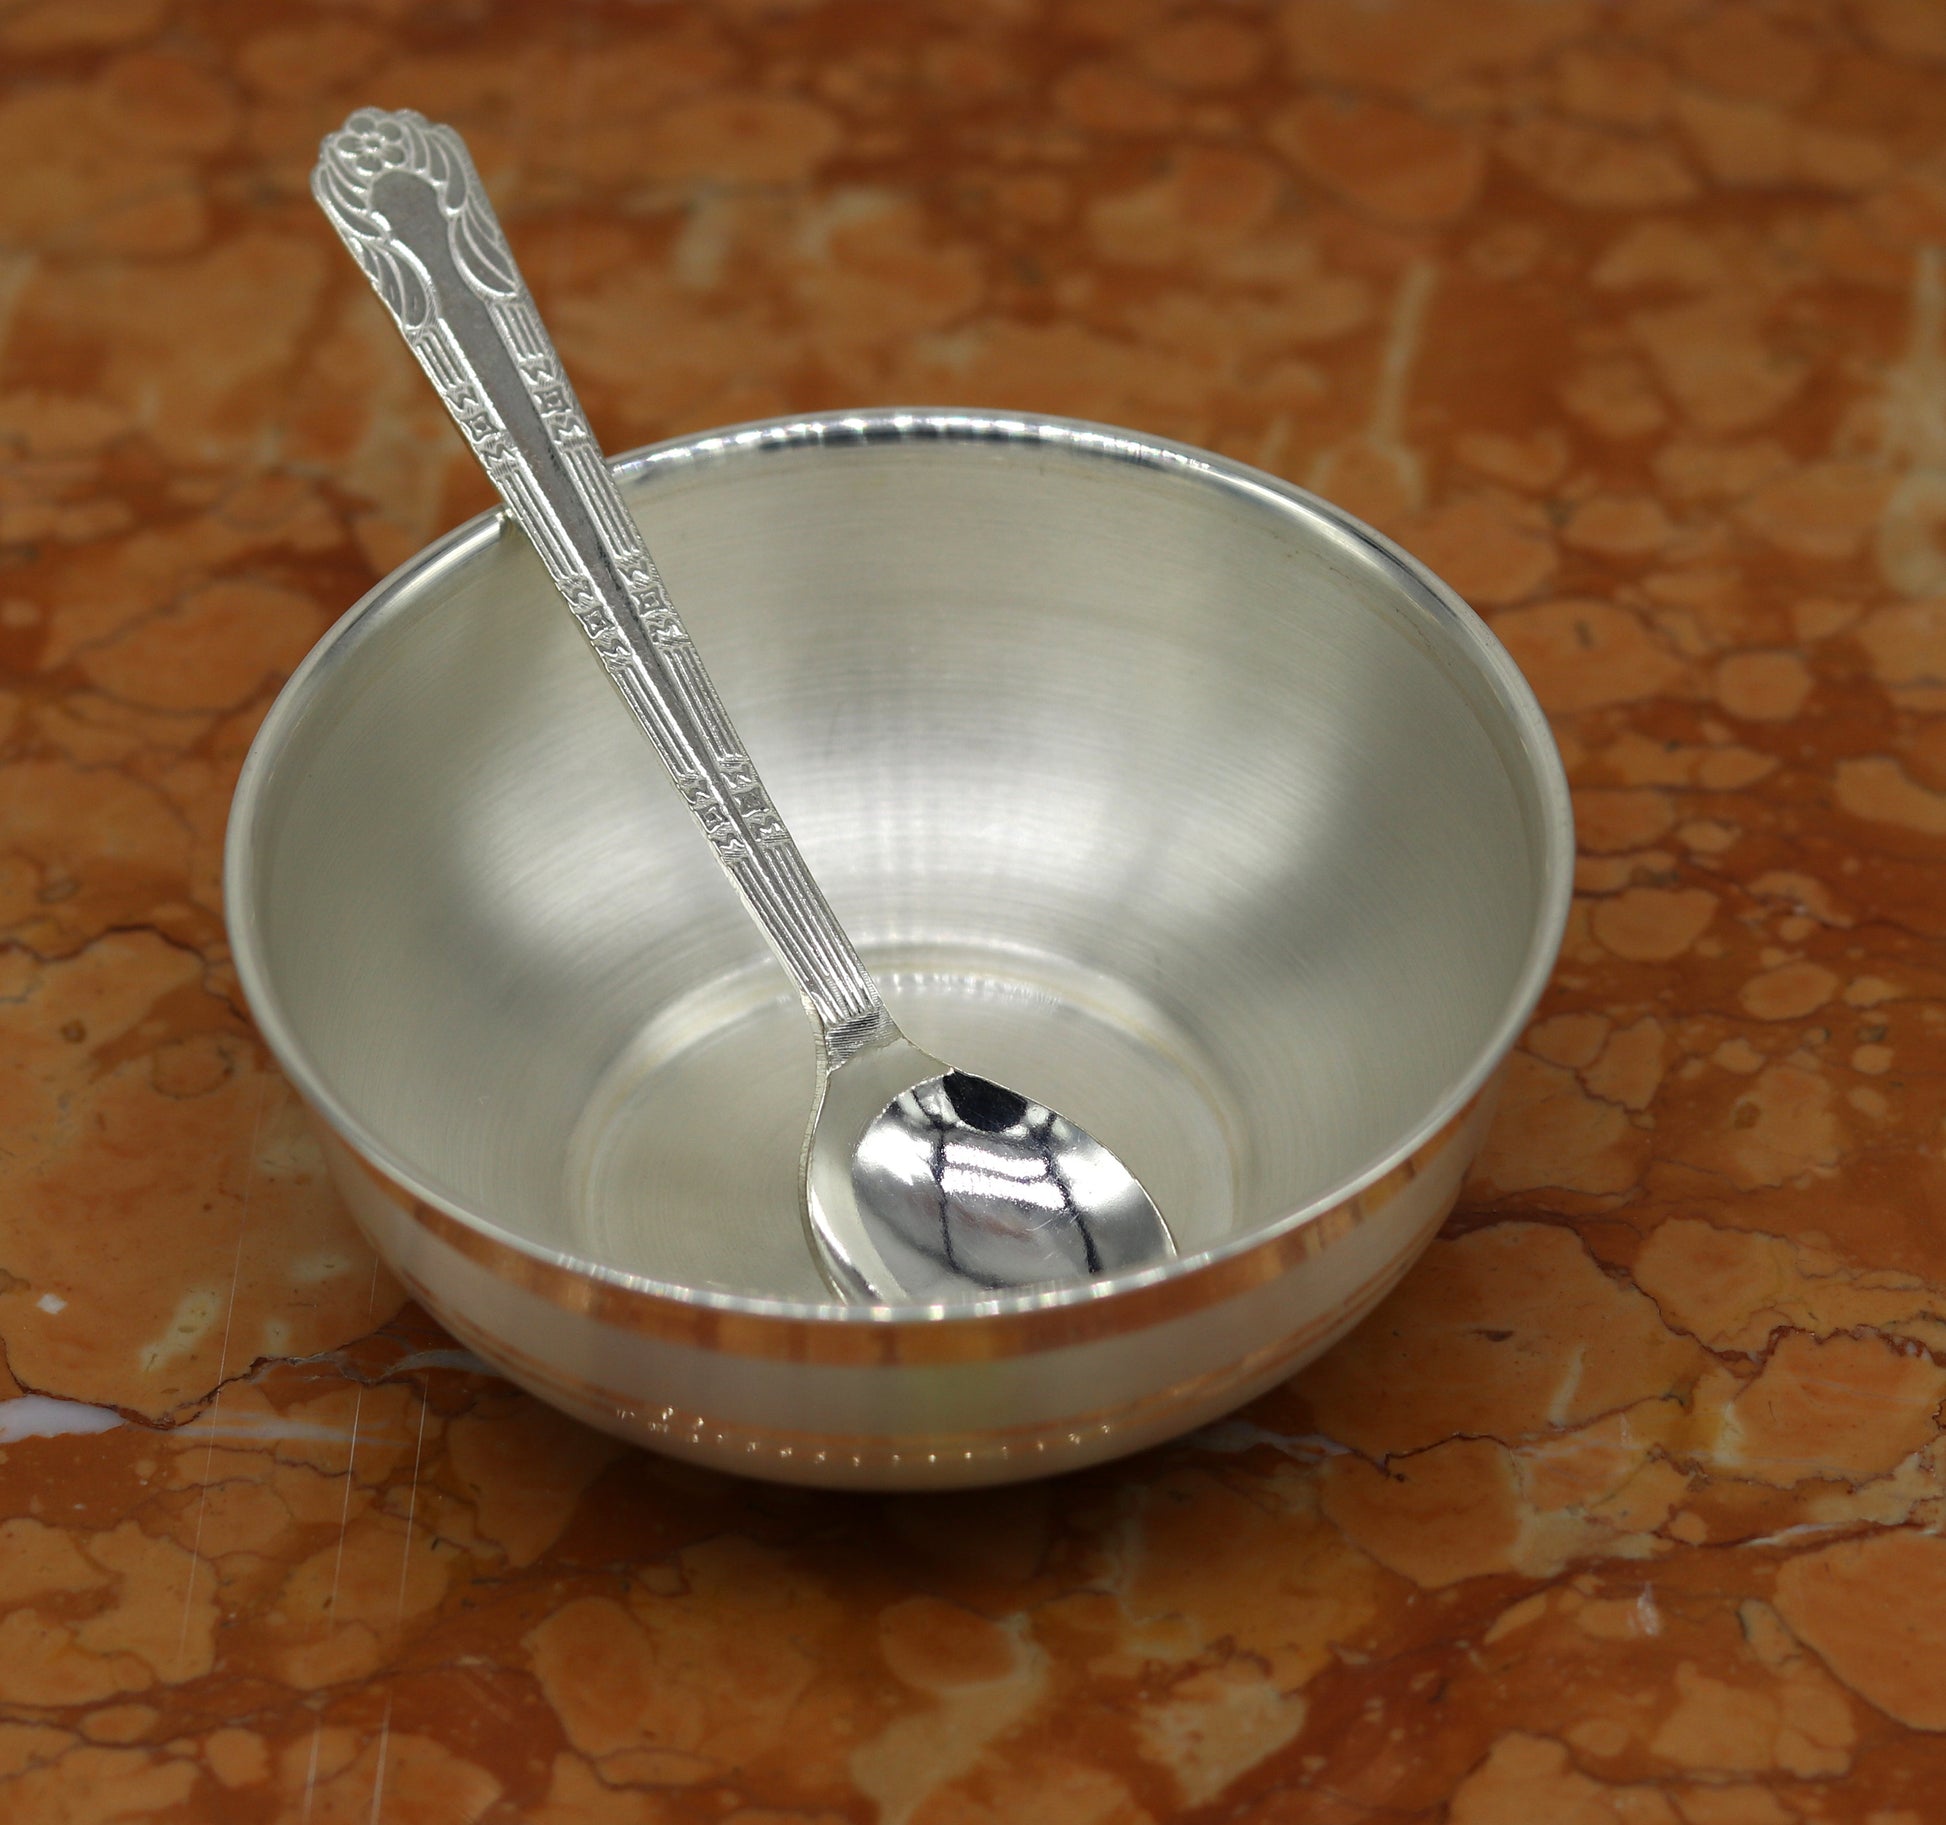 999 pure sterling silver handmade solid silver bowl and spoon, silver has antibacterial properties, keep stay healthy, silver vessels sv66 - TRIBAL ORNAMENTS